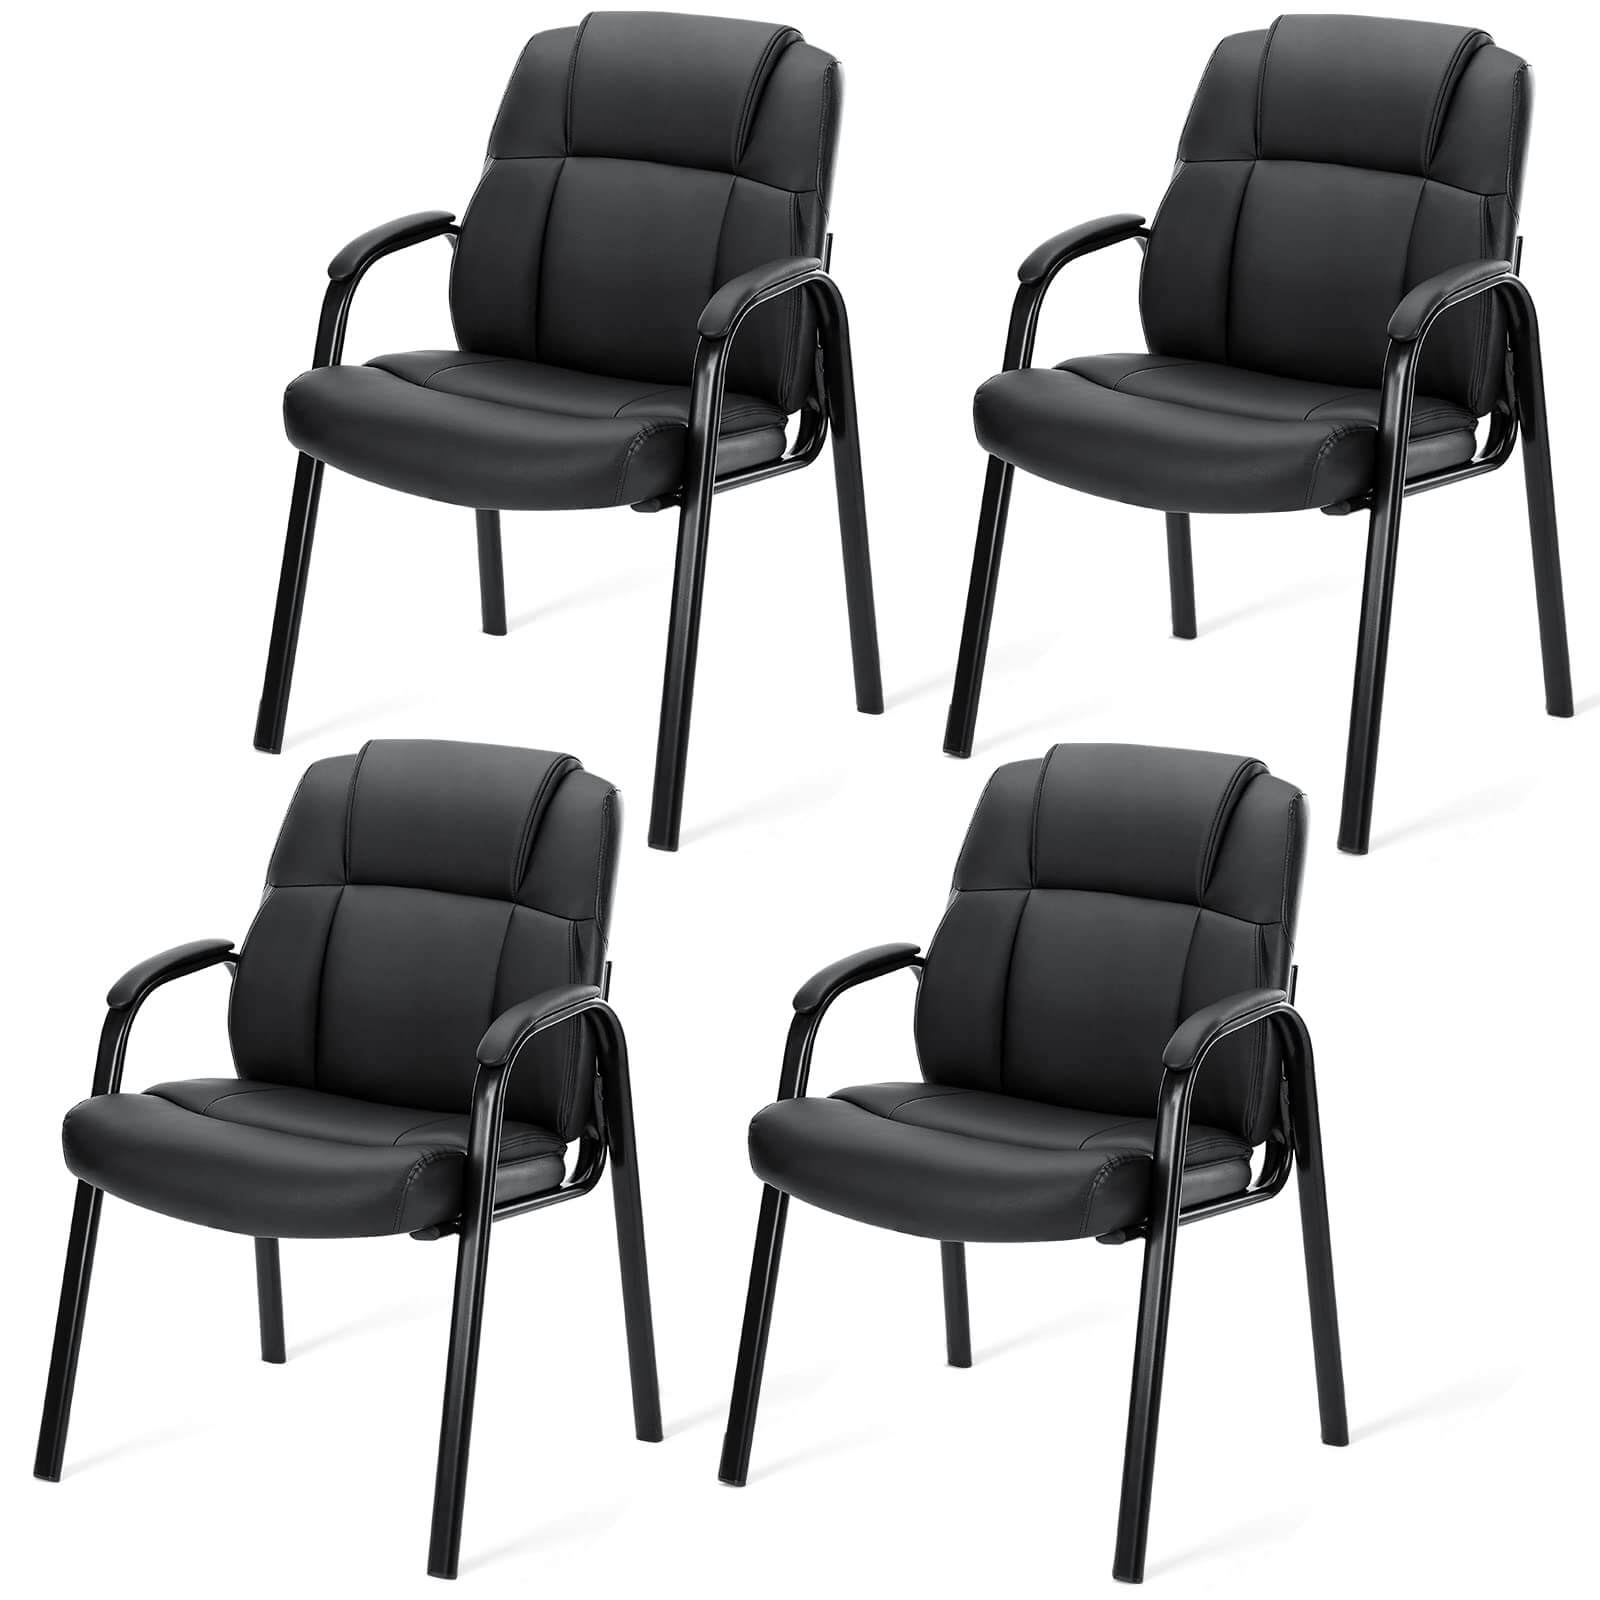 pu-leather-chairs#Quantity_4-PACK